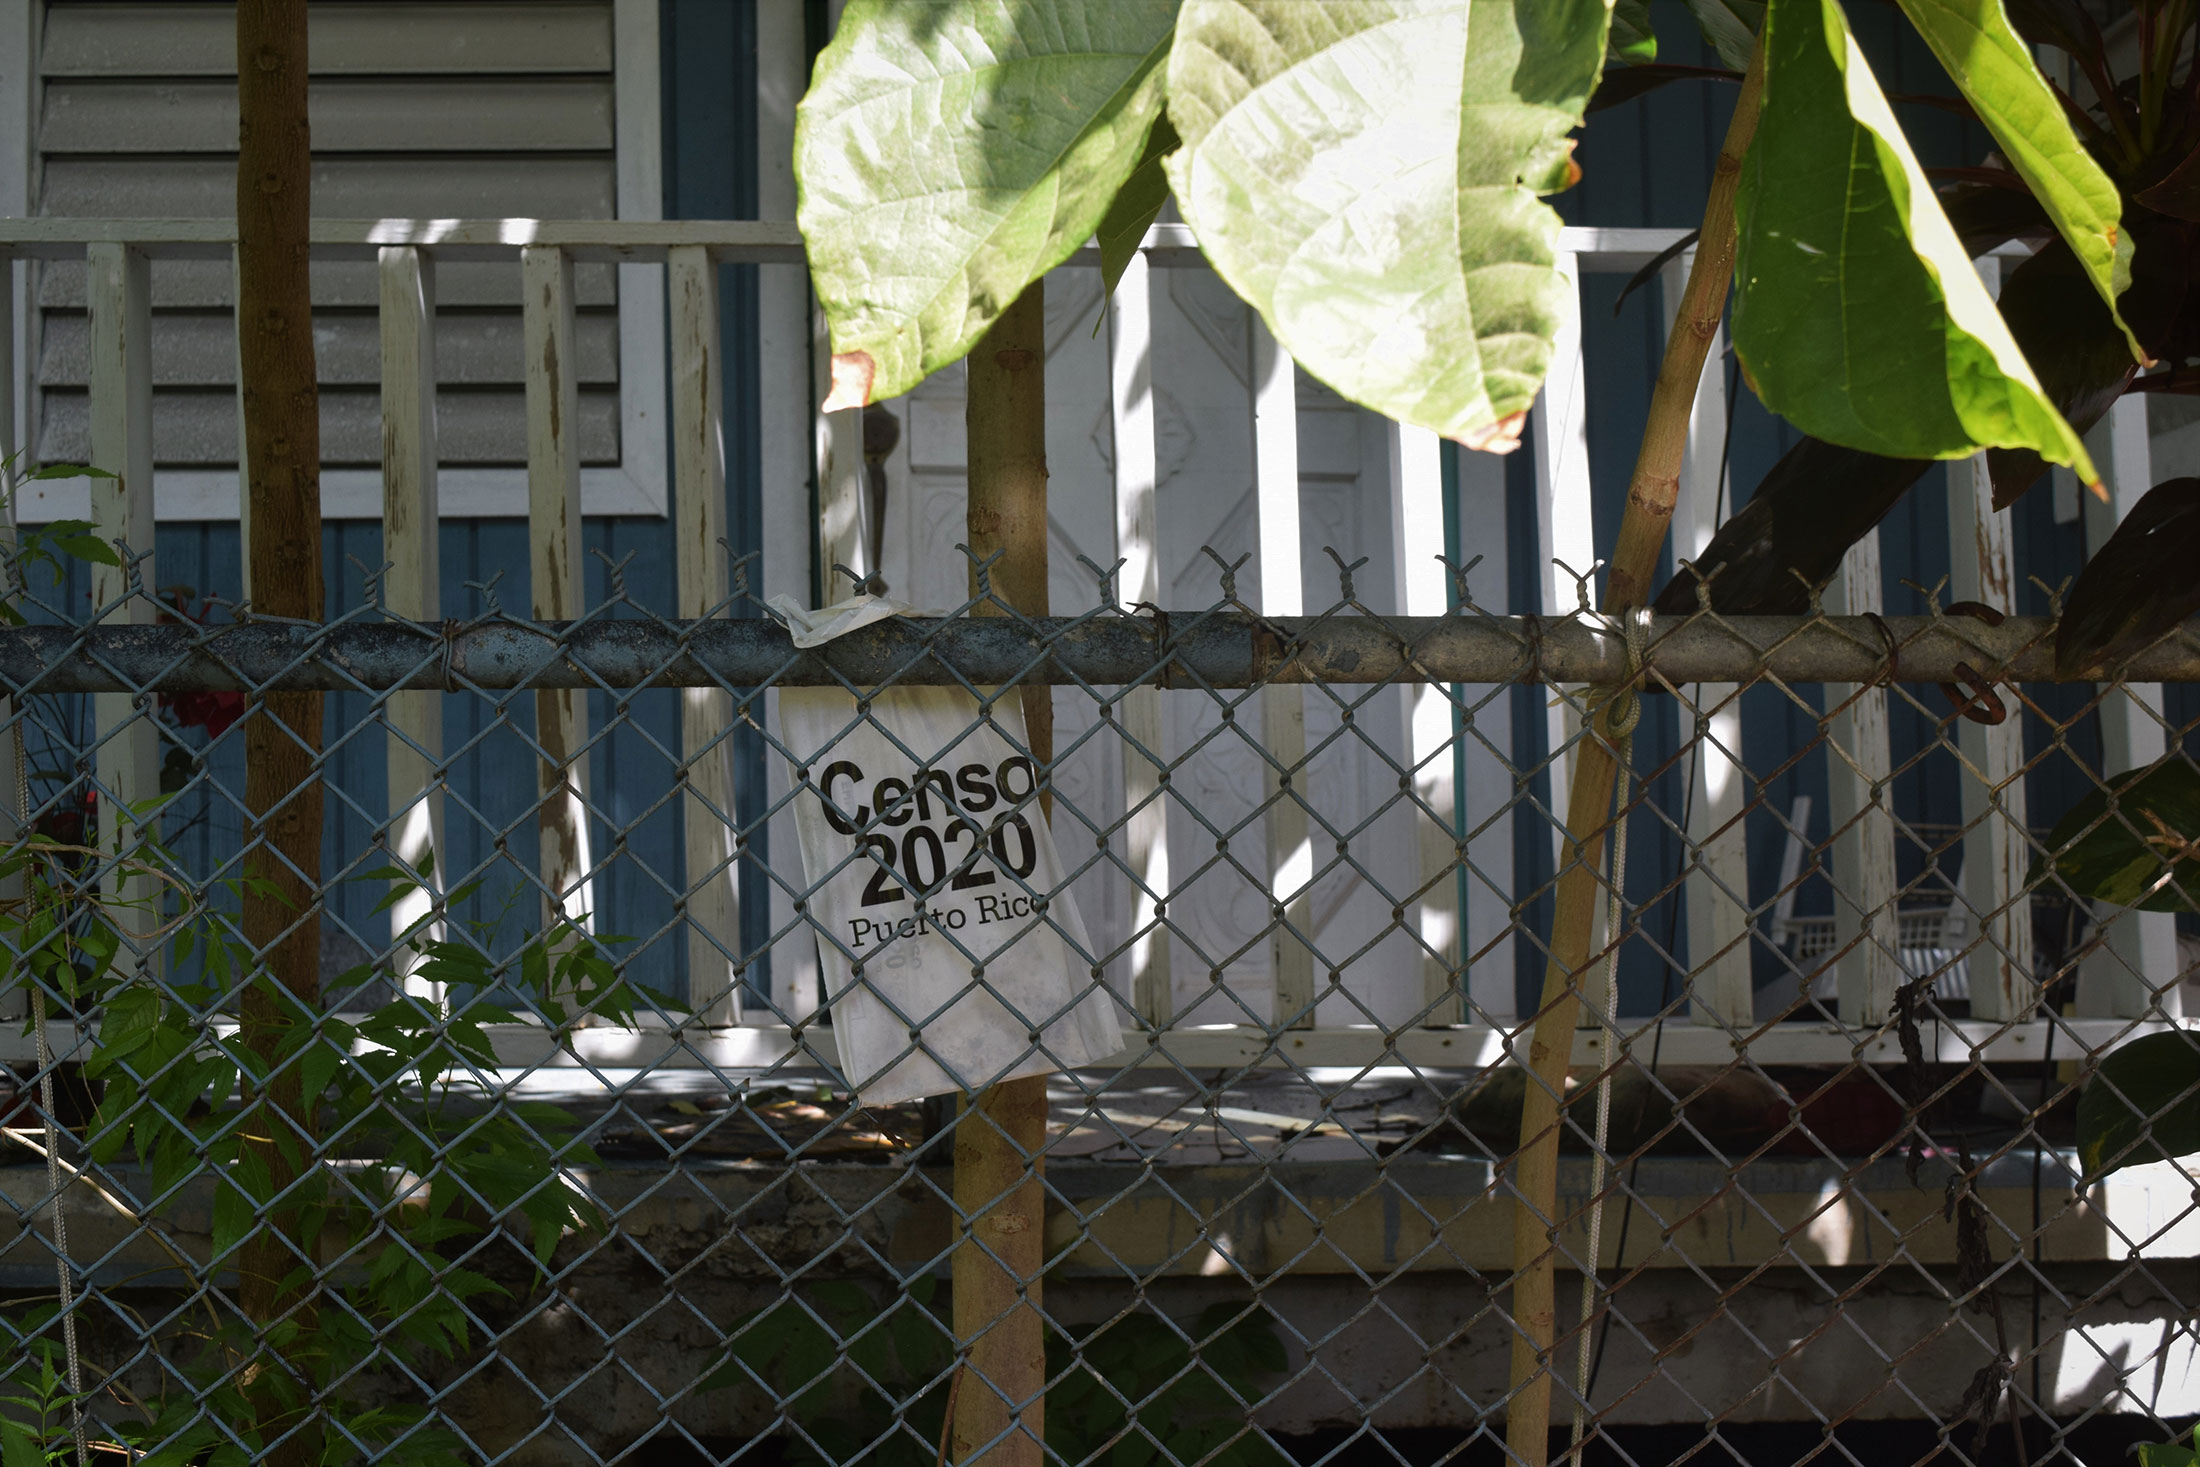 A census packet at an abandoned house in San Juan, Puerto Rico.